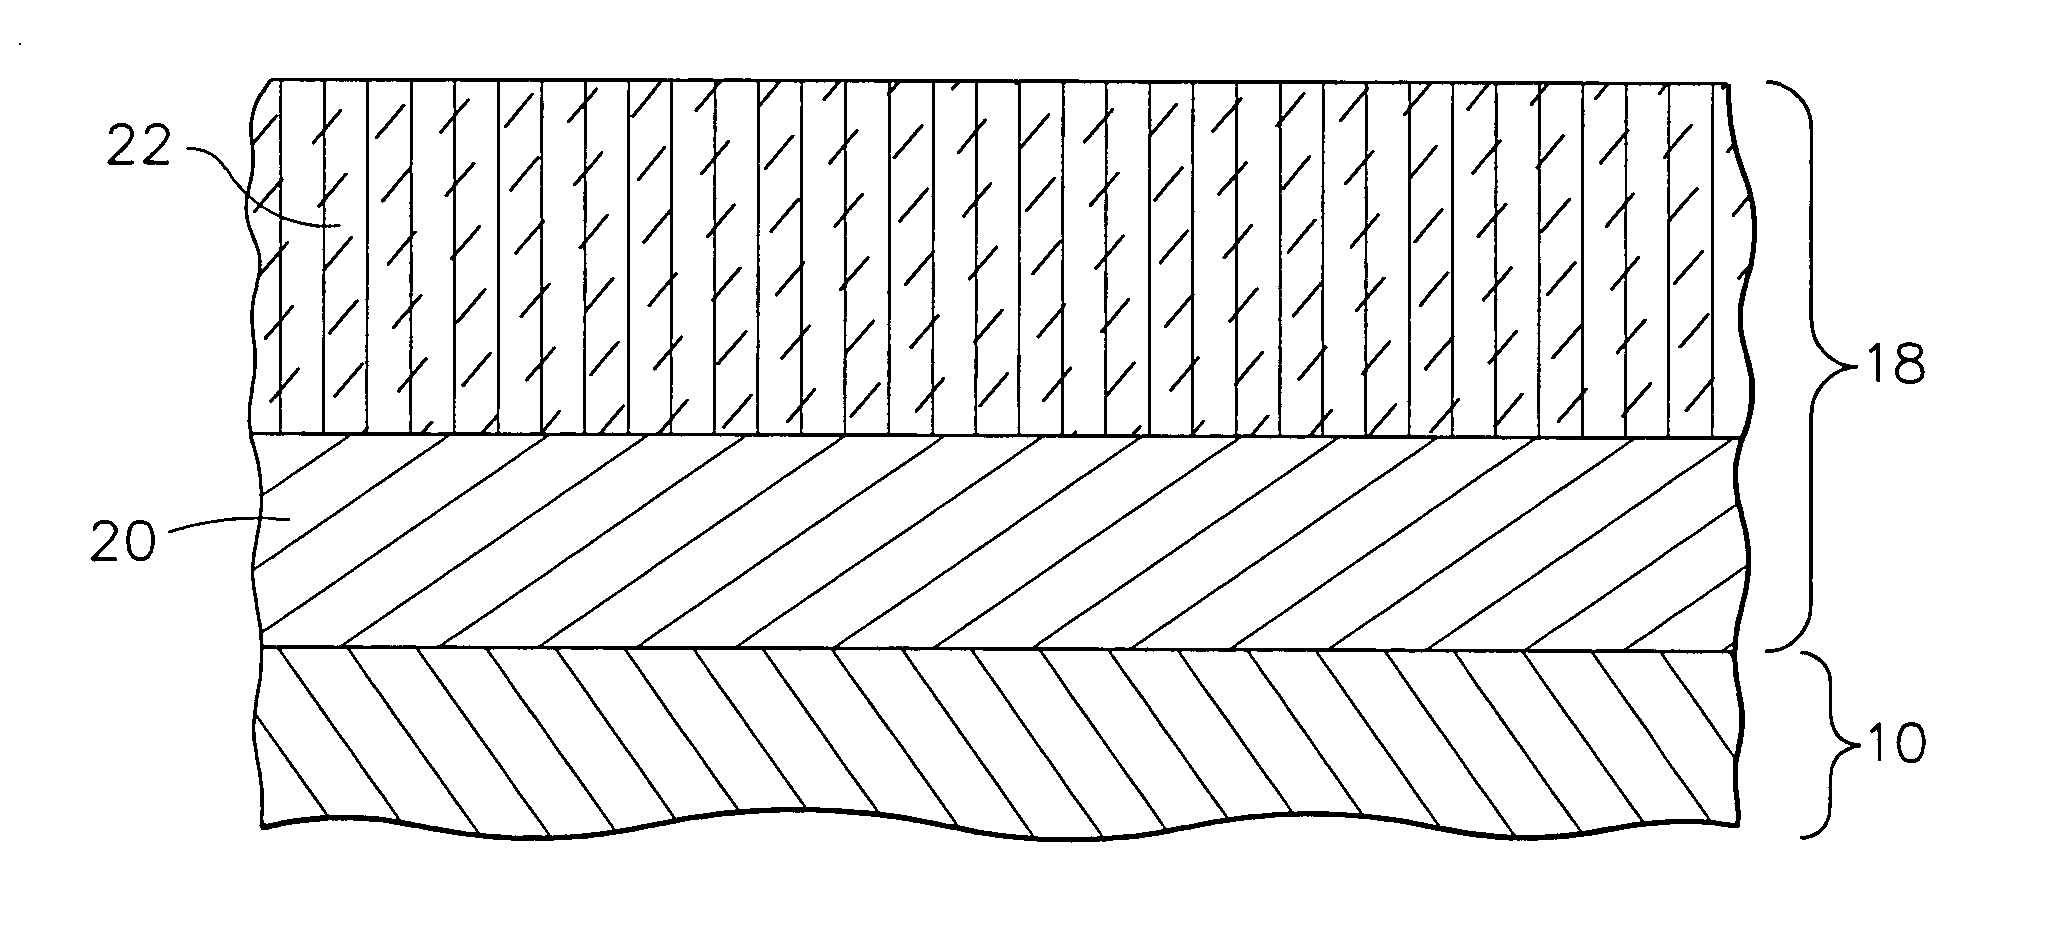 Method for repairing components using environmental bond coatings and resultant repaired components